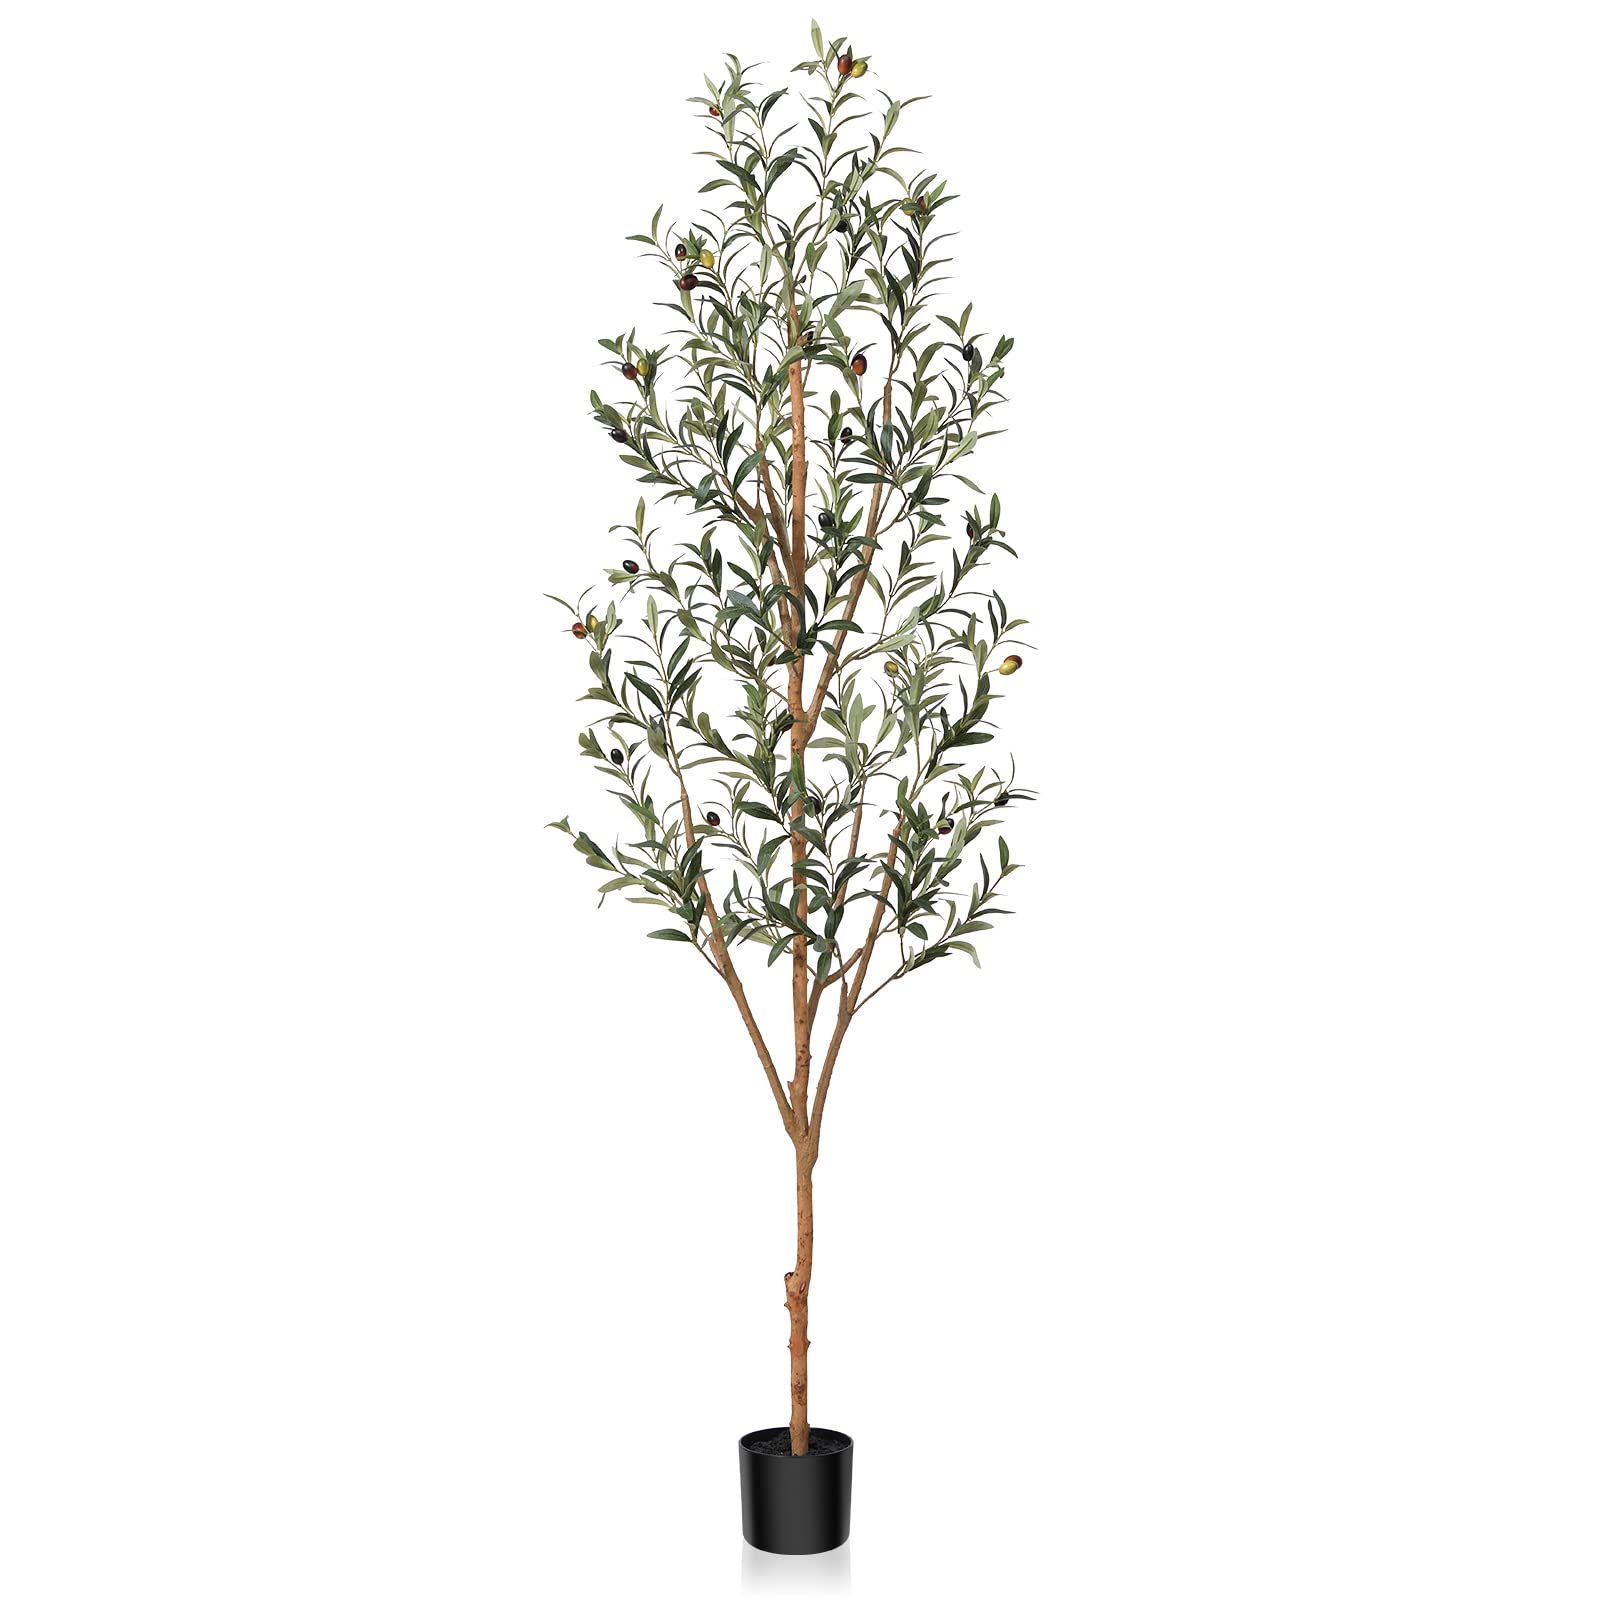 Kazeila Artificial Olive Tree 6FT Tall Faux Silk Plant for Home Office Decor Indoor Fake Potted Tree | Amazon (US)